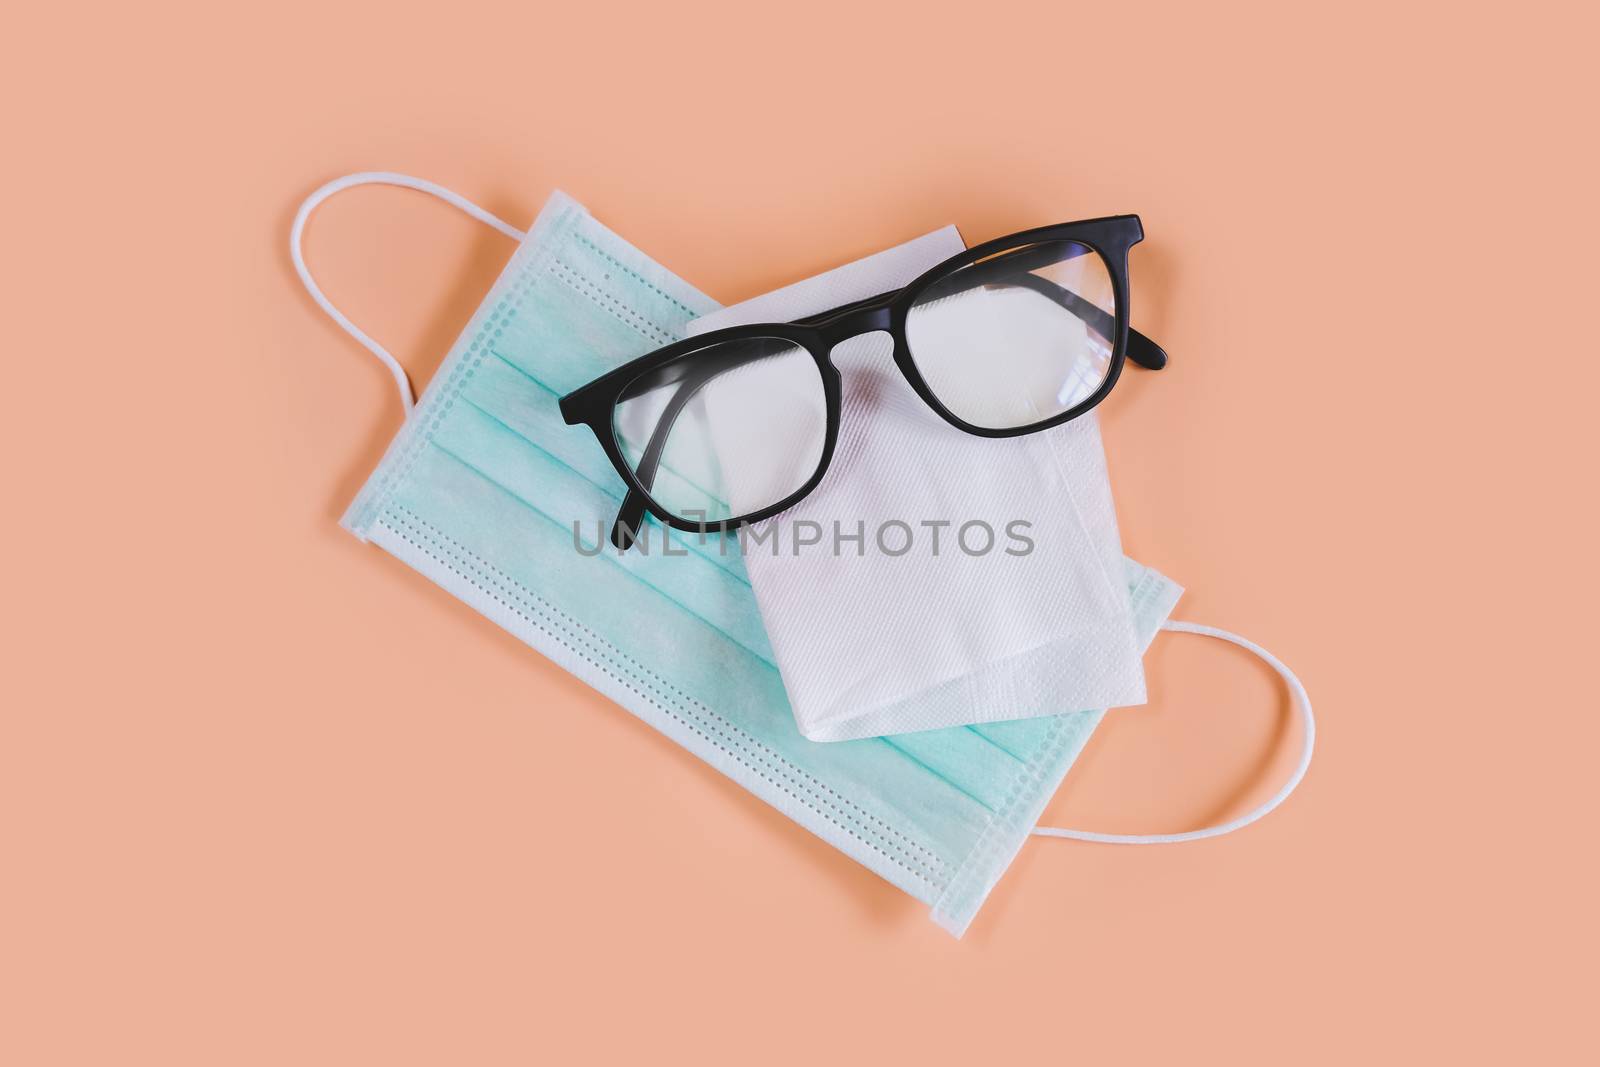 tip to stop face masks from fogging up on glasses lenses when walking outside during coronavirus pandemic. fold tissue paper and put inside the top of the mask can prevent fog from breath.